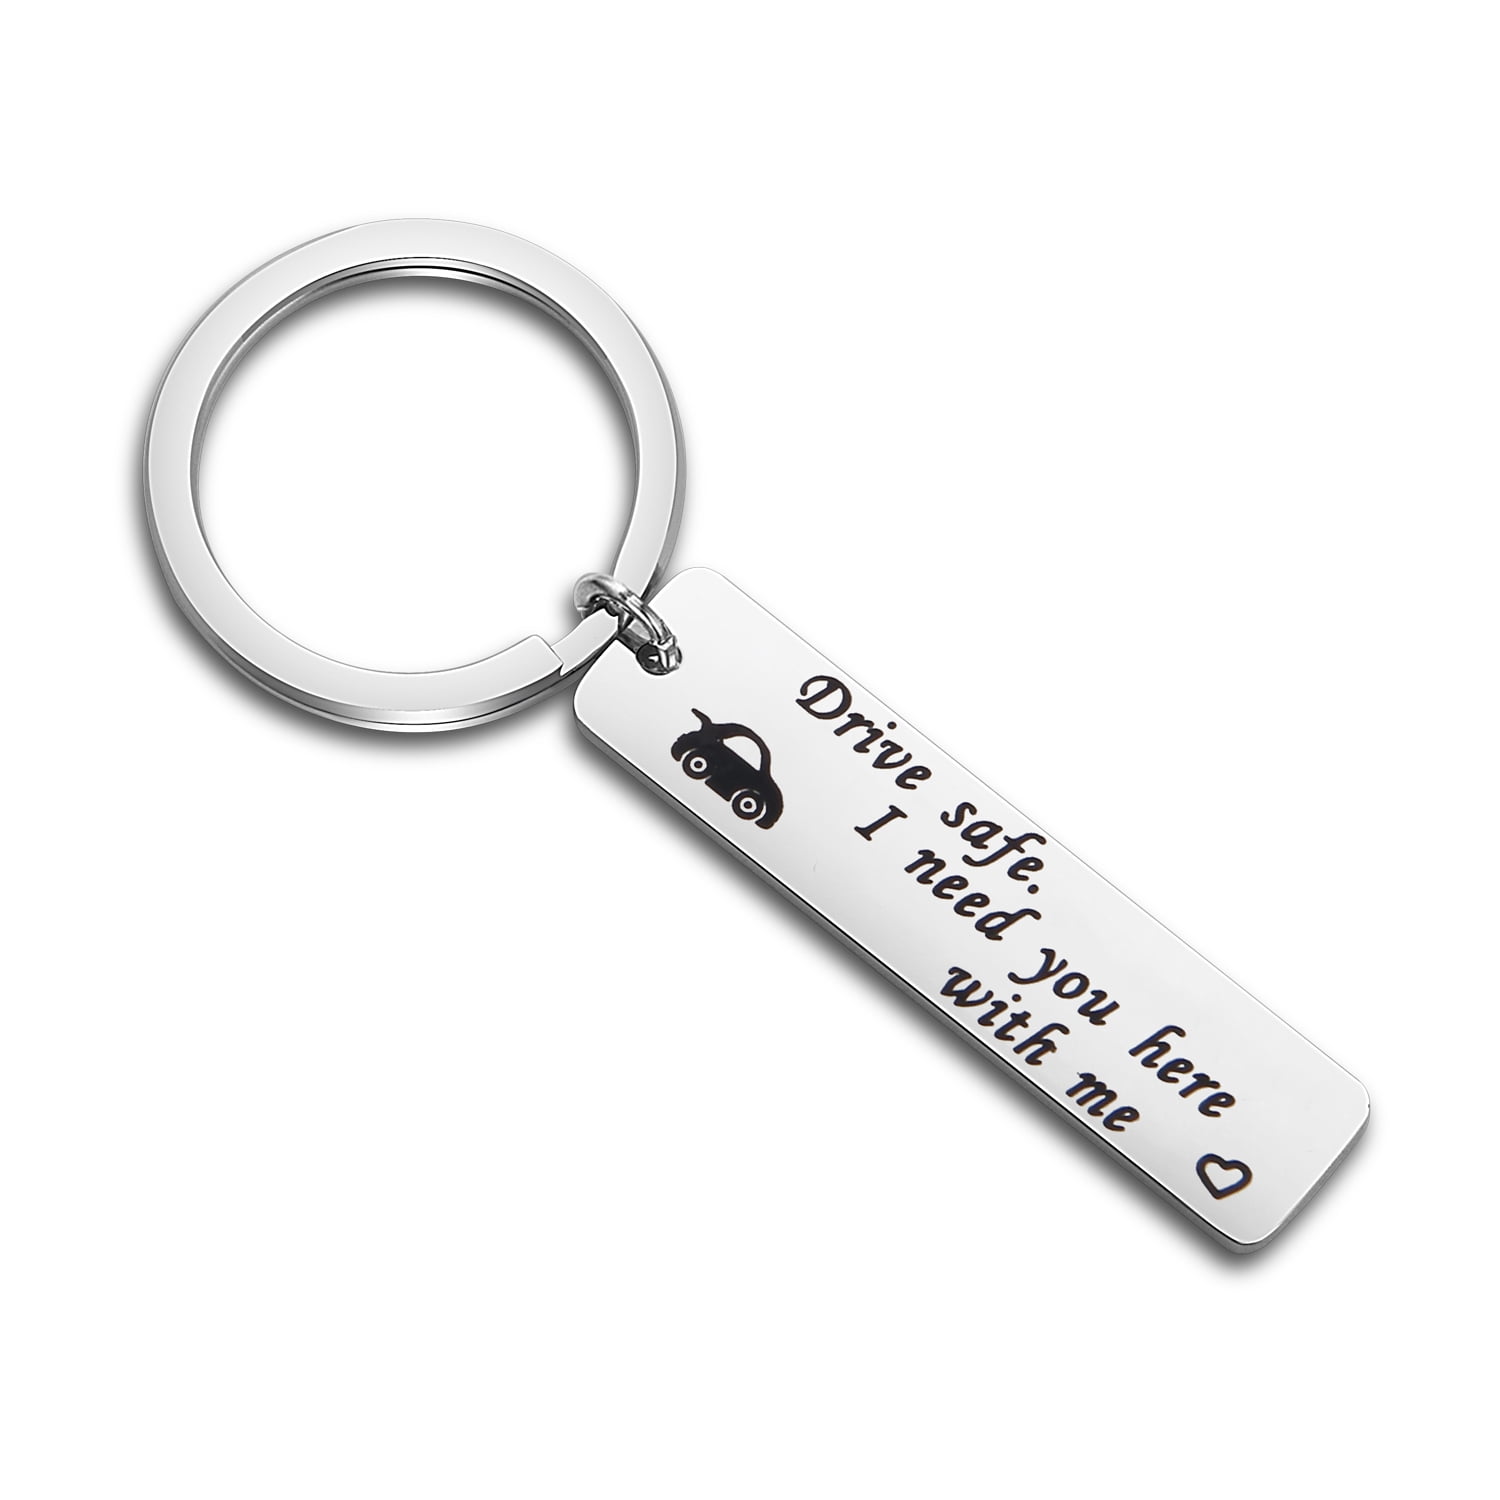 Drive Safe I Need You Here With Me Keyring Keychain Family Couple Love Key Rings 